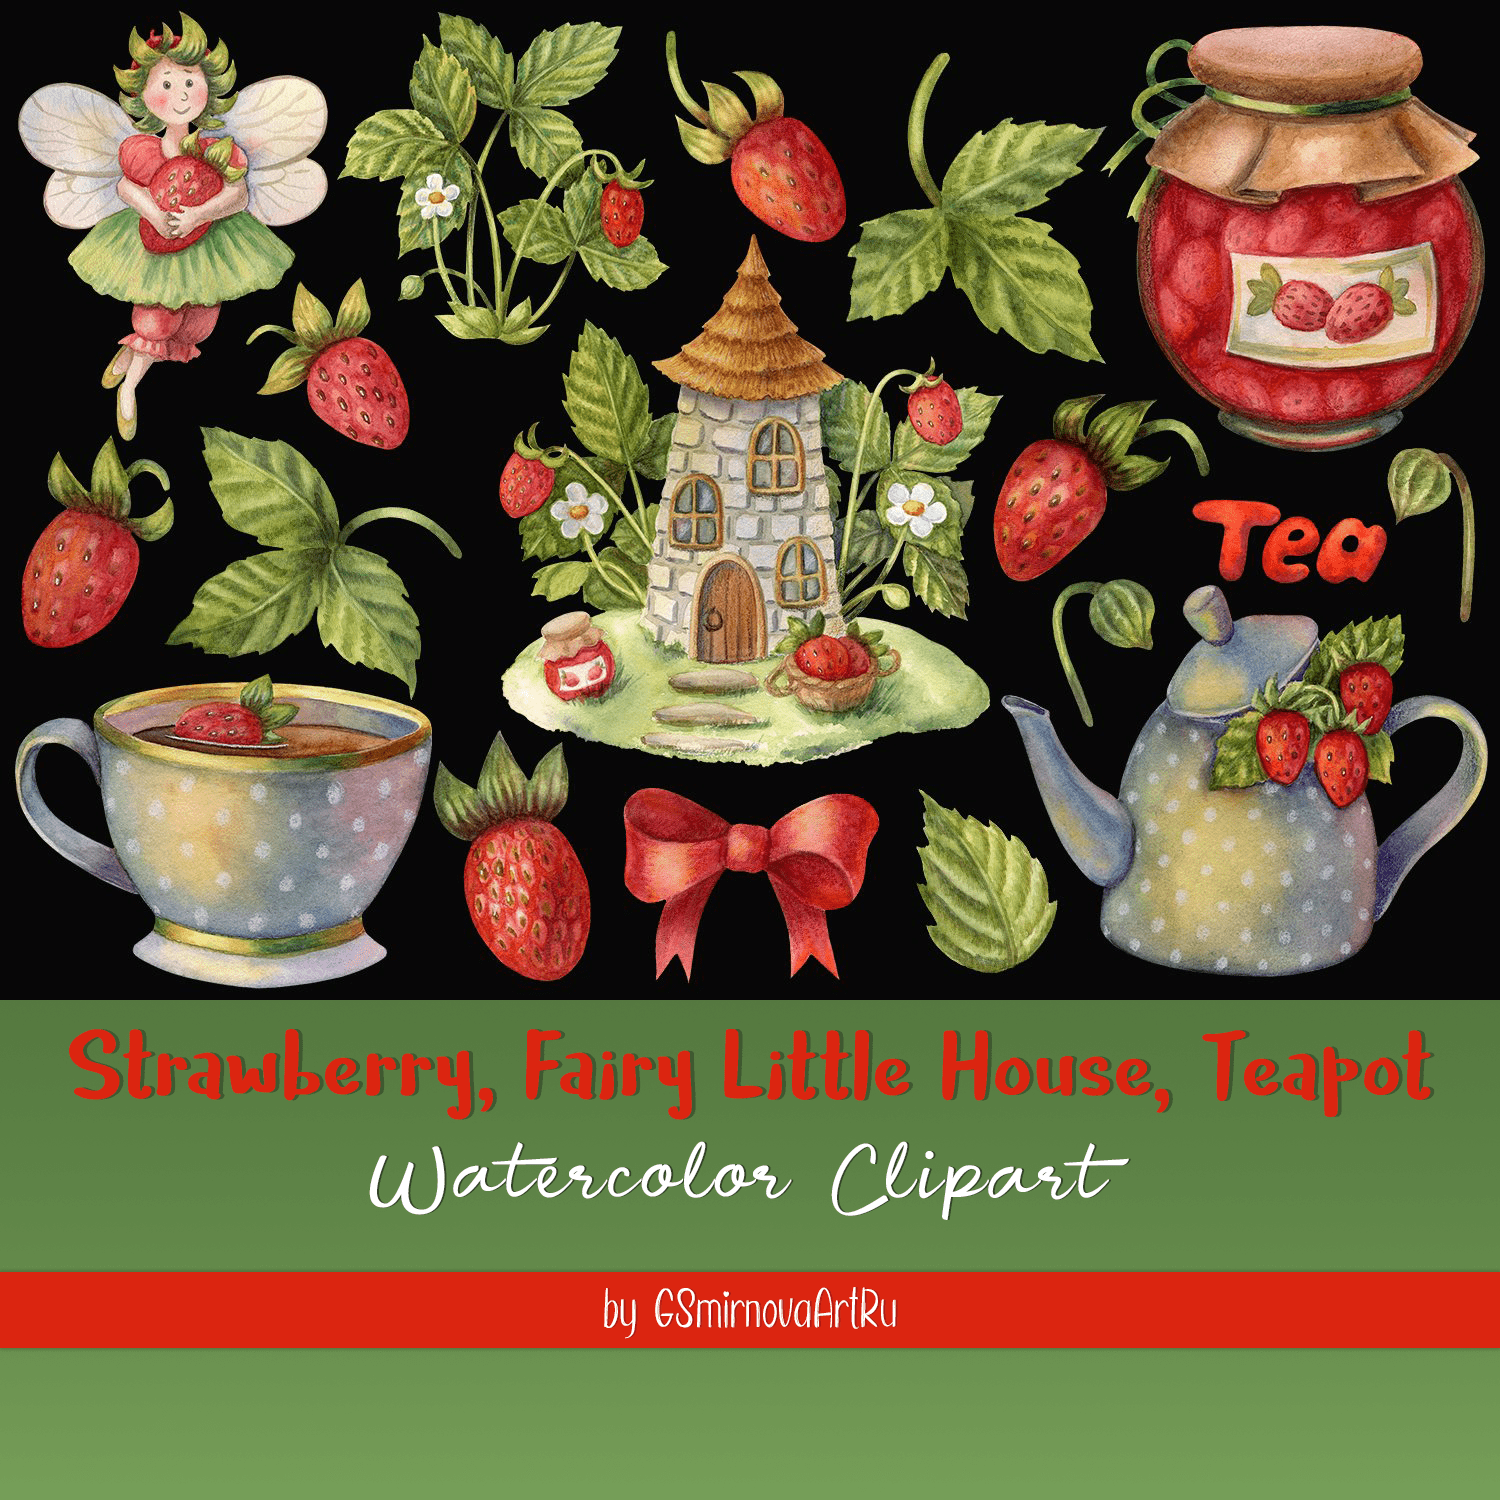 Strawberry, Watercolor Clipart, Fairy Little House, Teapot Cover.